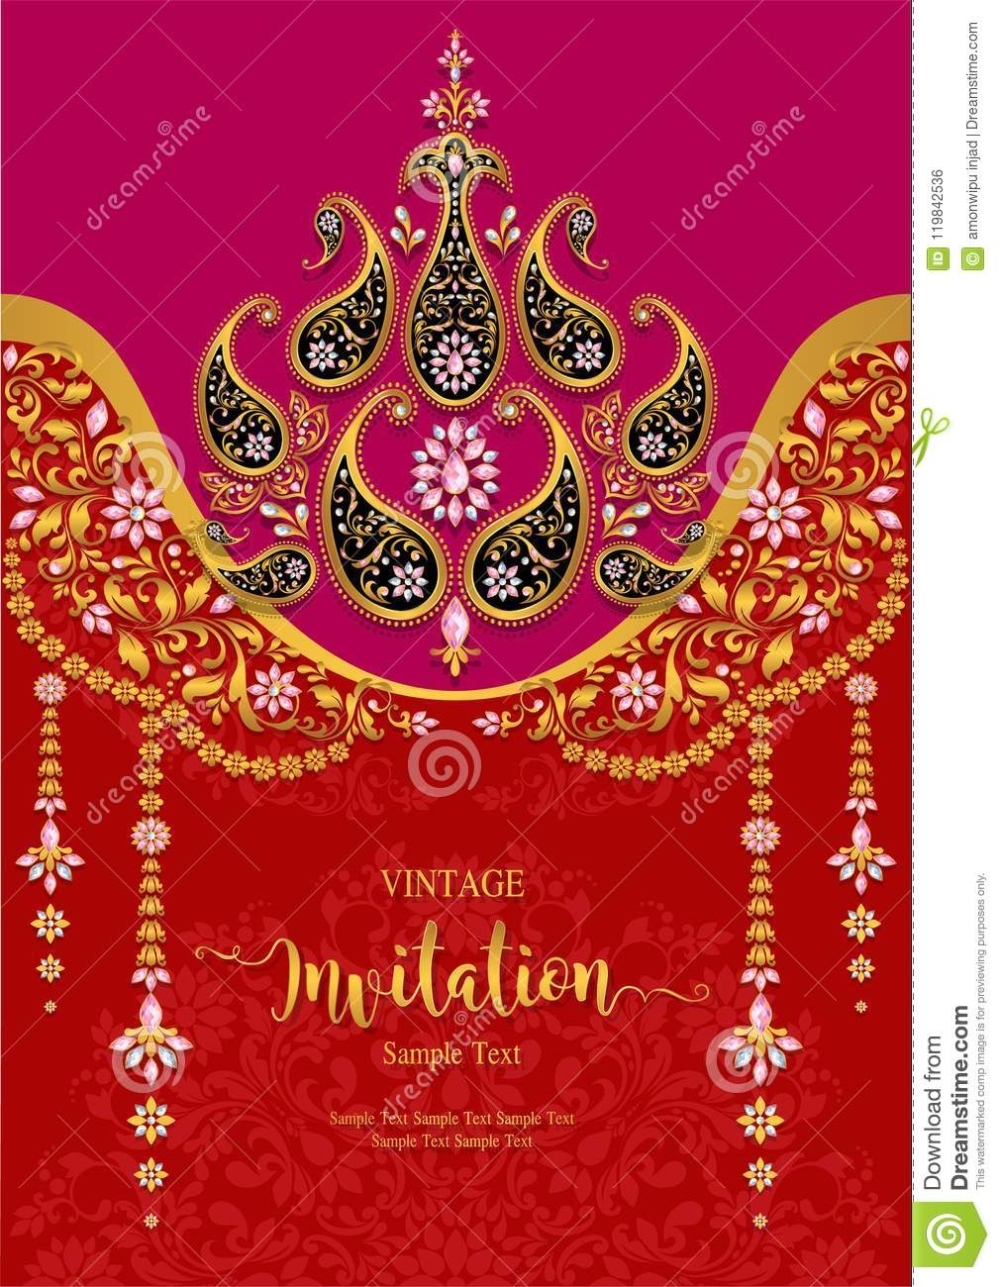 View Traditional Indian Wedding Invitation Card Template Gif Pertaining To Indian Wedding Cards Design Templates